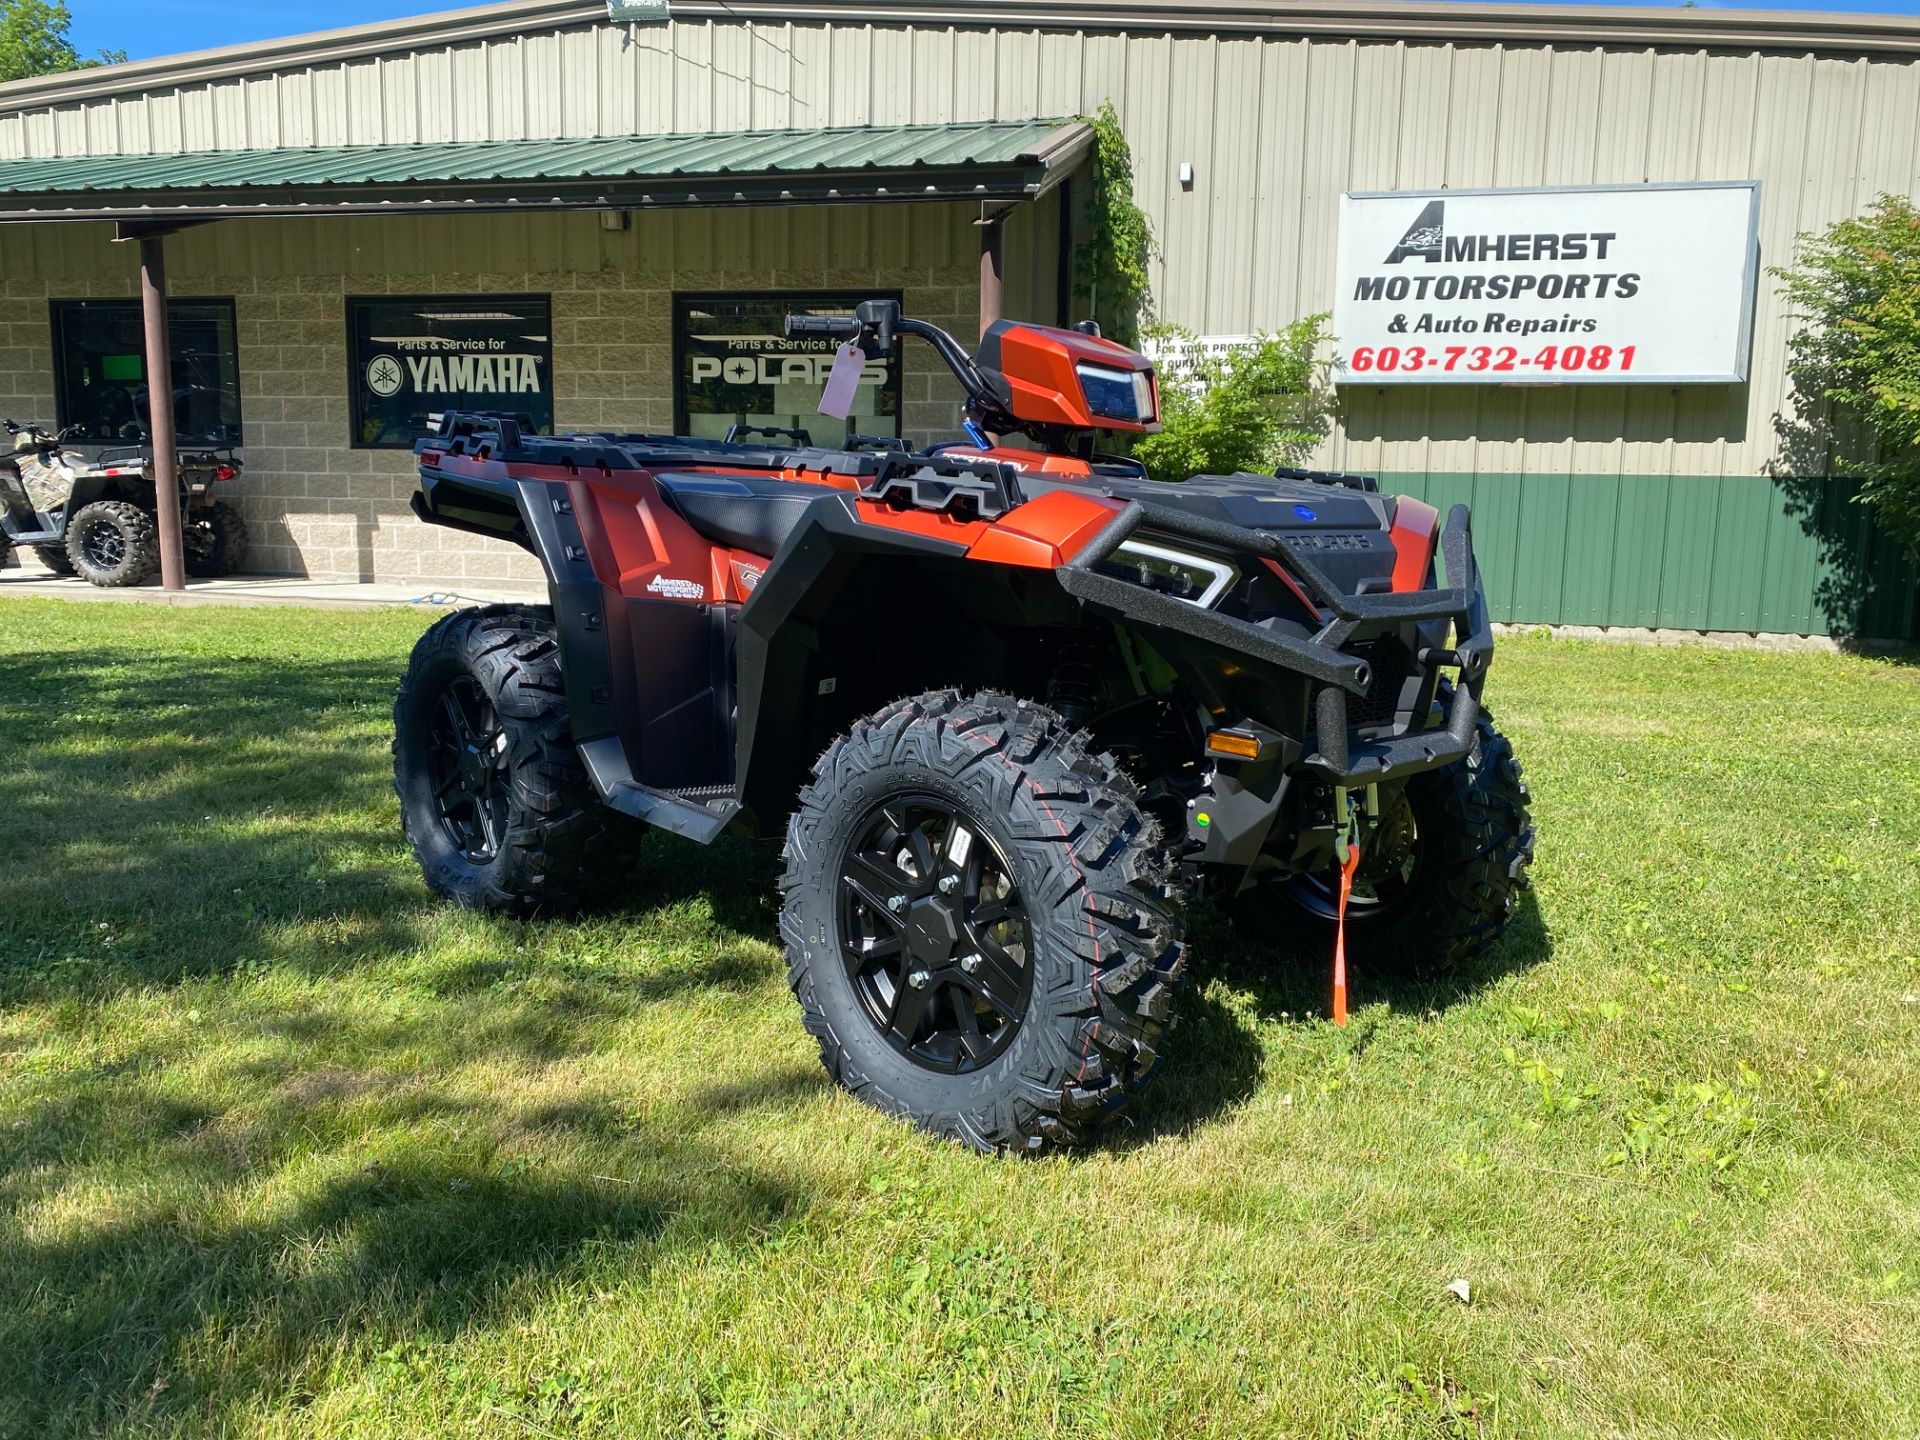 2022 Polaris Sportsman 850 Ultimate Trail in Milford, New Hampshire - Photo 1